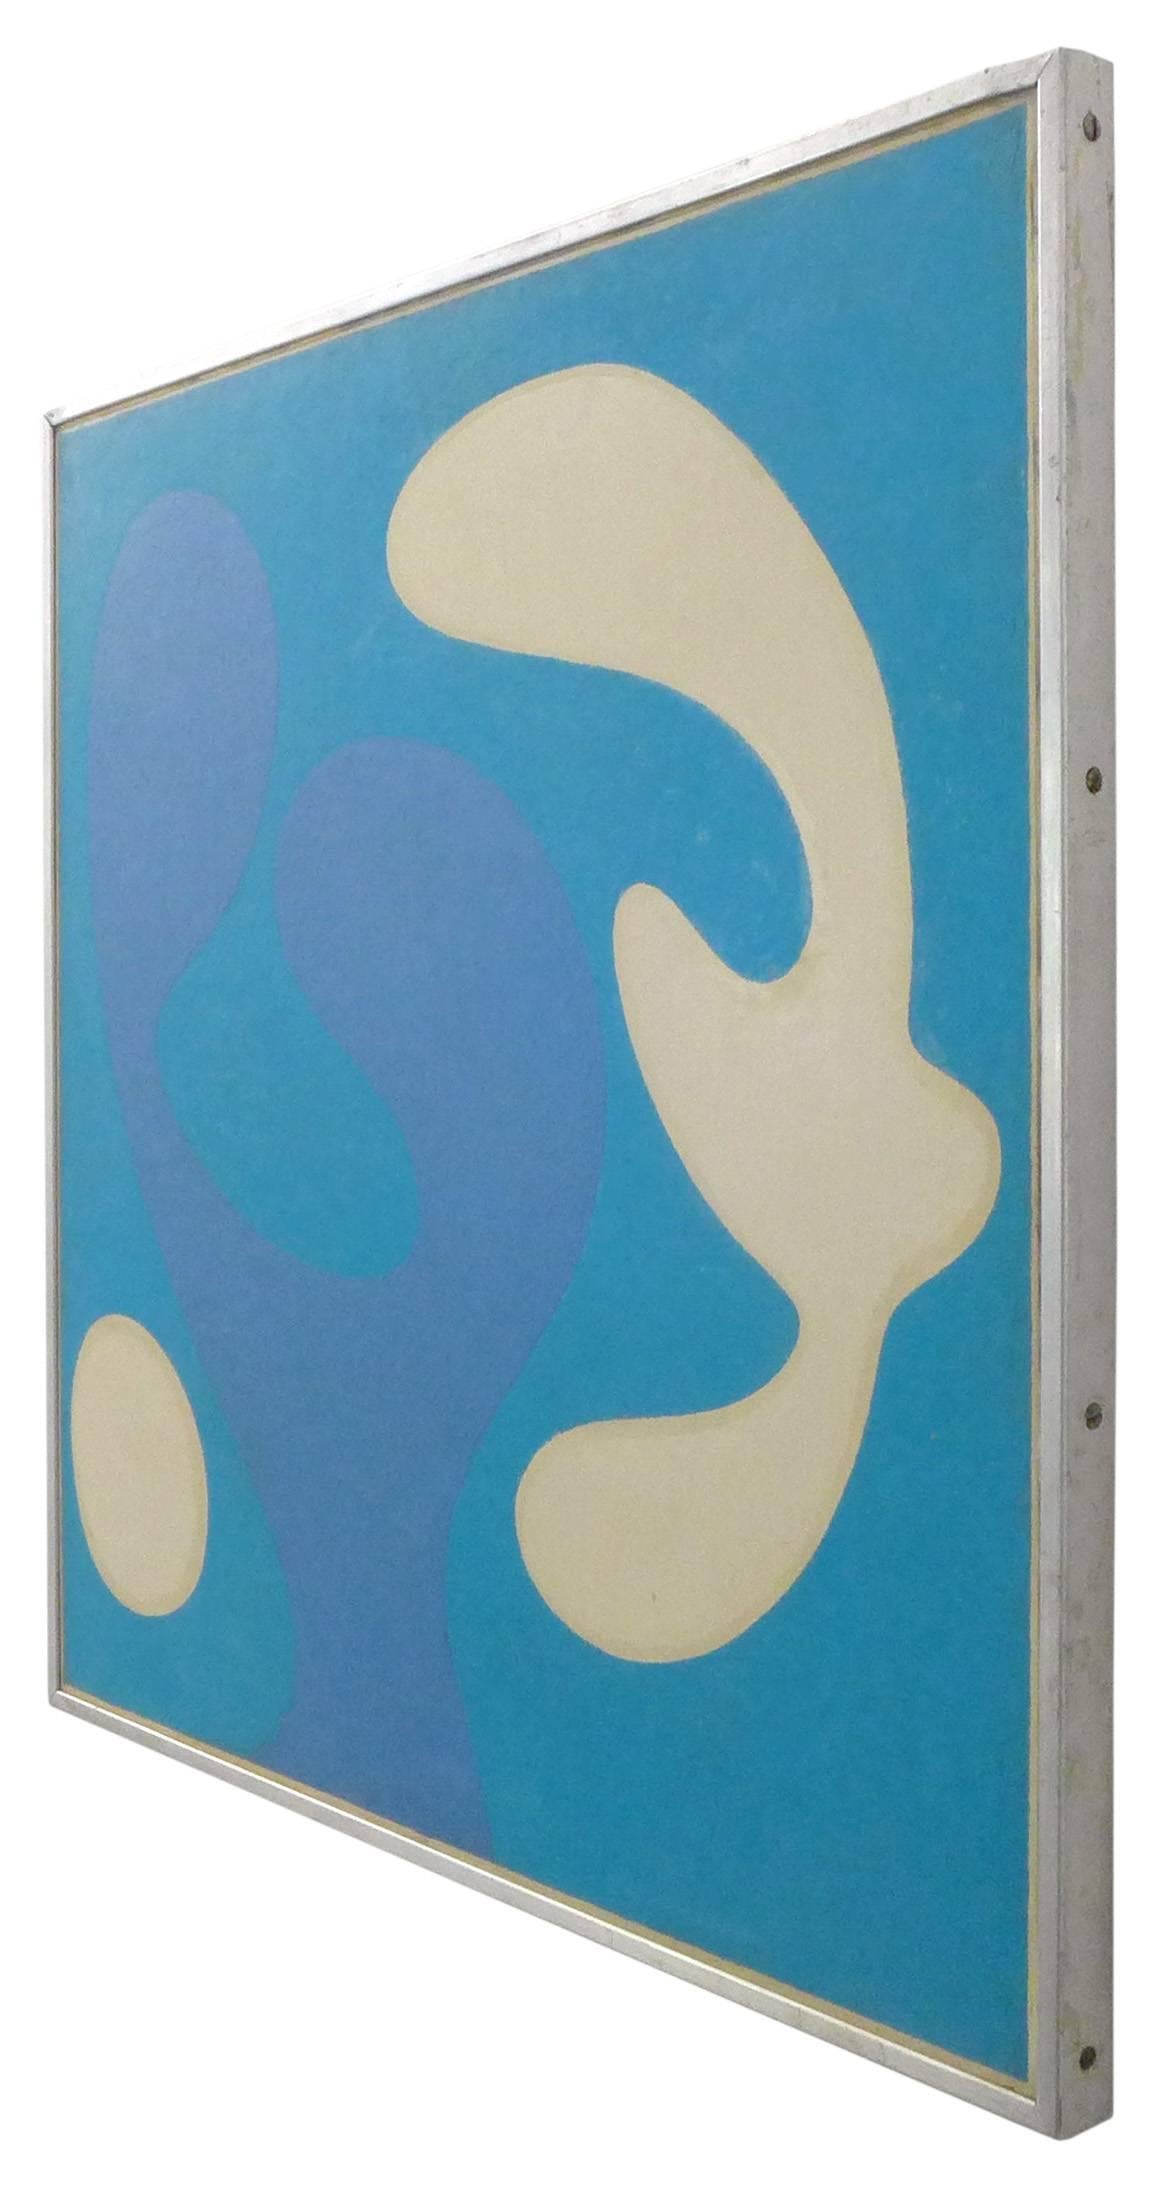 A beautiful abstract oil painting on masonite board. An interacting collection of three amorphous forms in a simple, serene palette of whites and blues; a wonderfully executed work exuding a calm and playful harmony. The painting wears a nice,